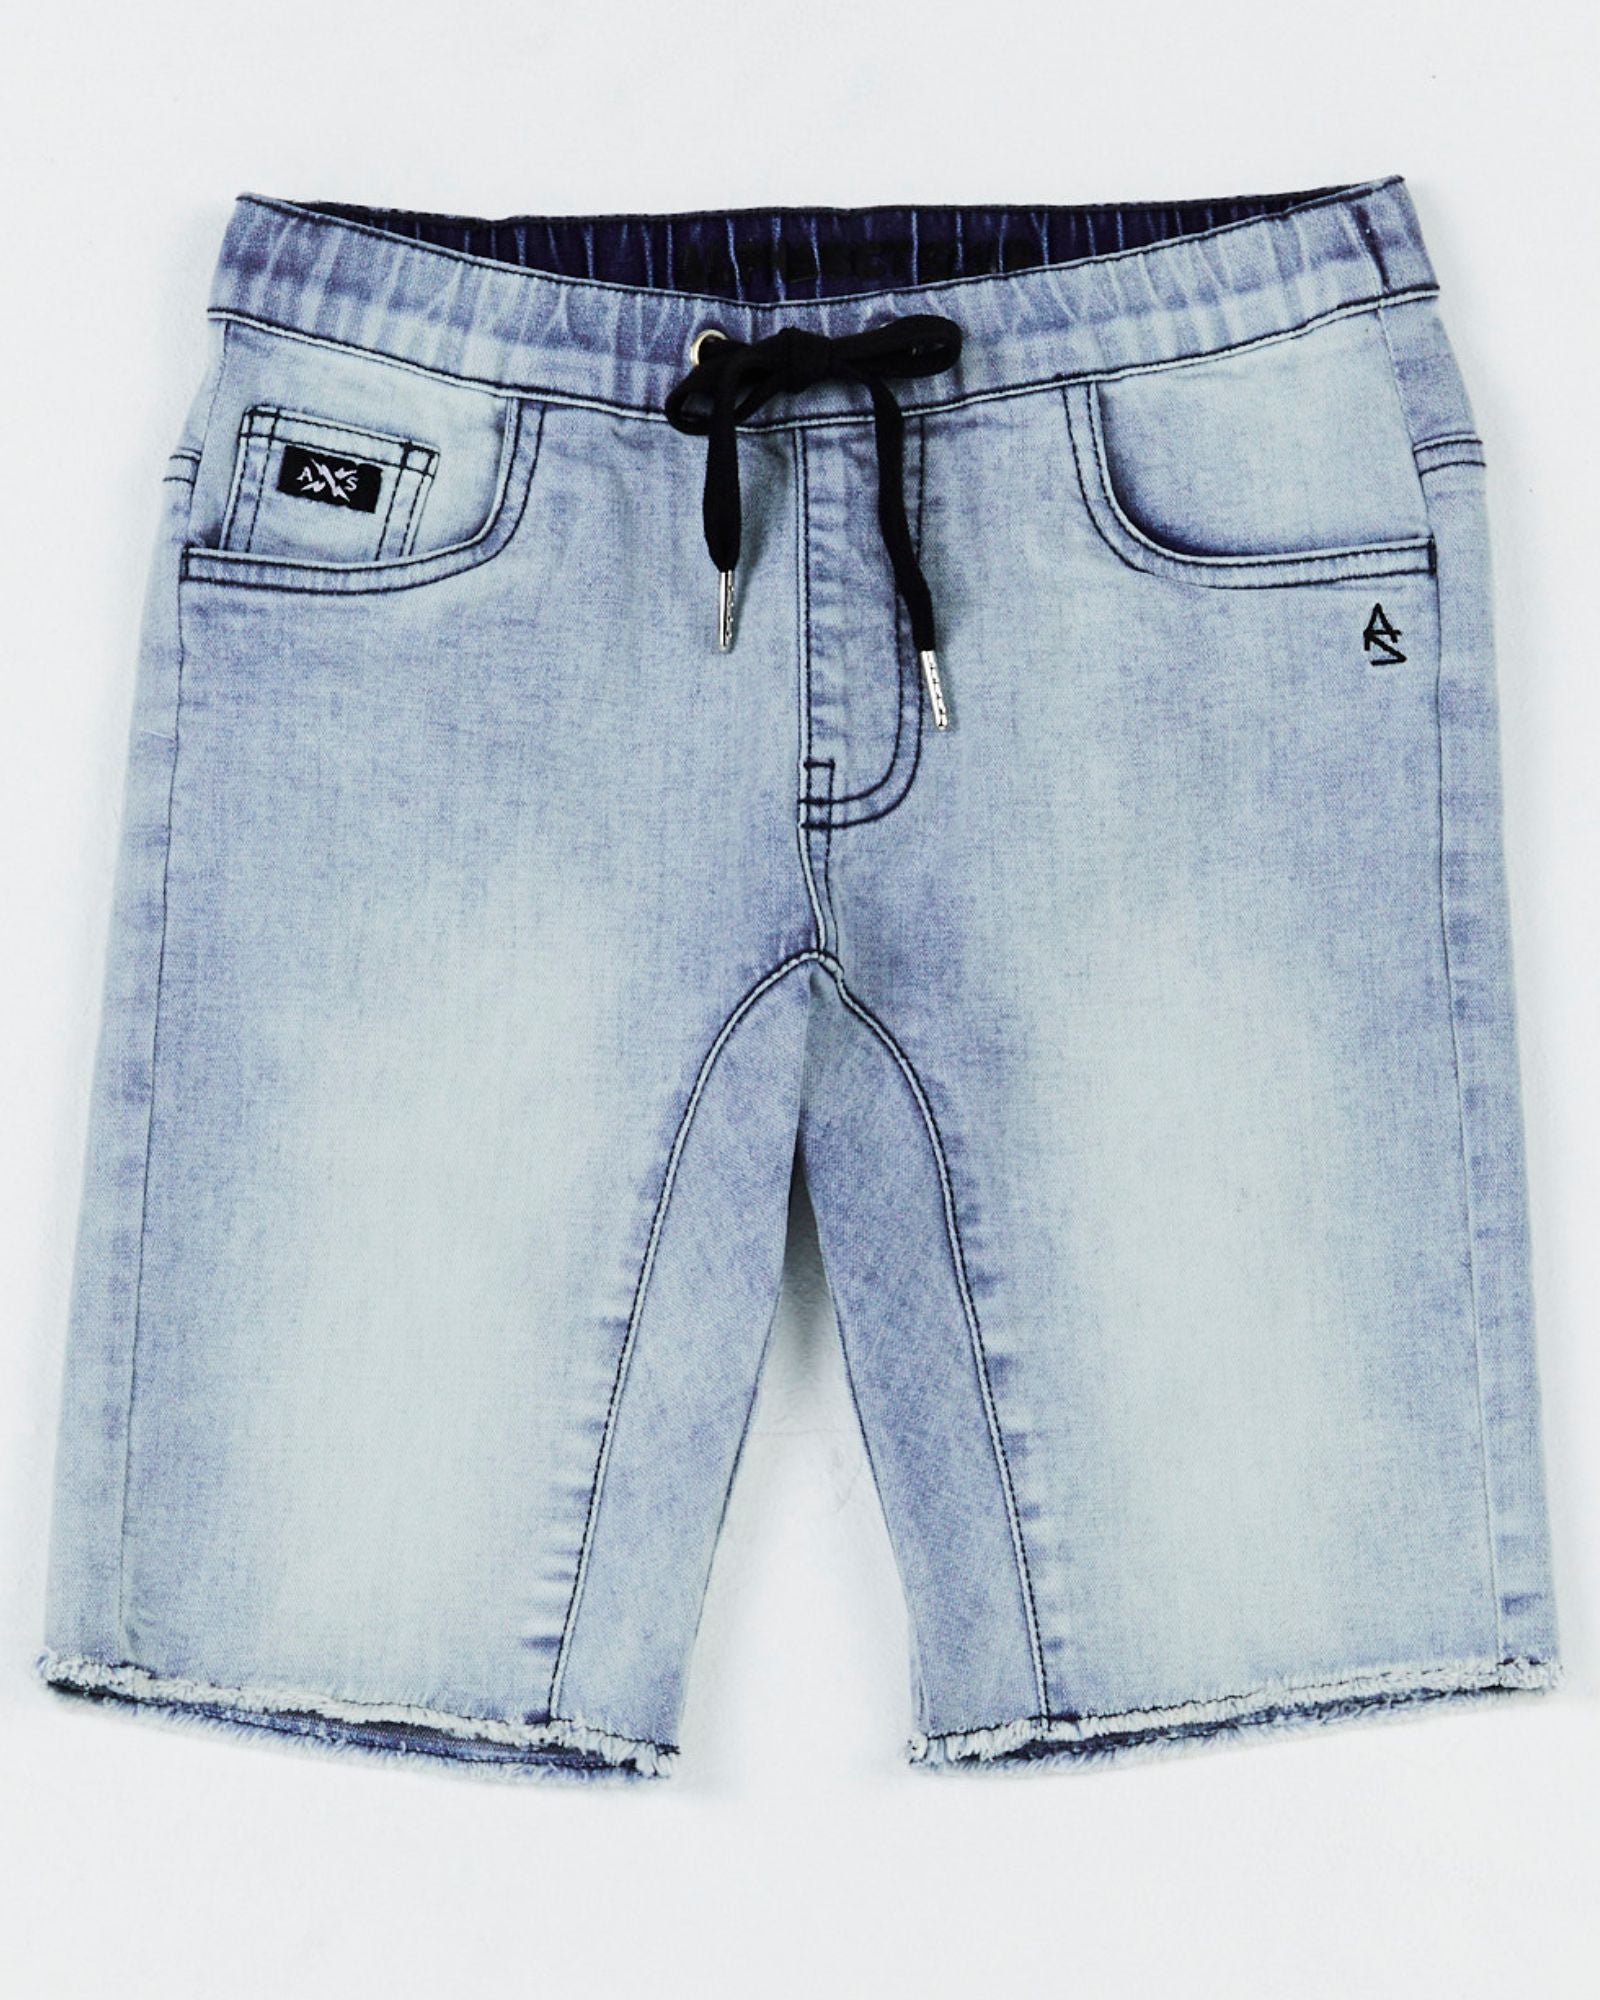 Alphabet Soup's Teen Chopper Jogg Jean Short for boys aged 8-16. Featuring super comfy stretch light blue faded denim, elasticated waist, adjustable drawcords, faux fly and five pocket design.